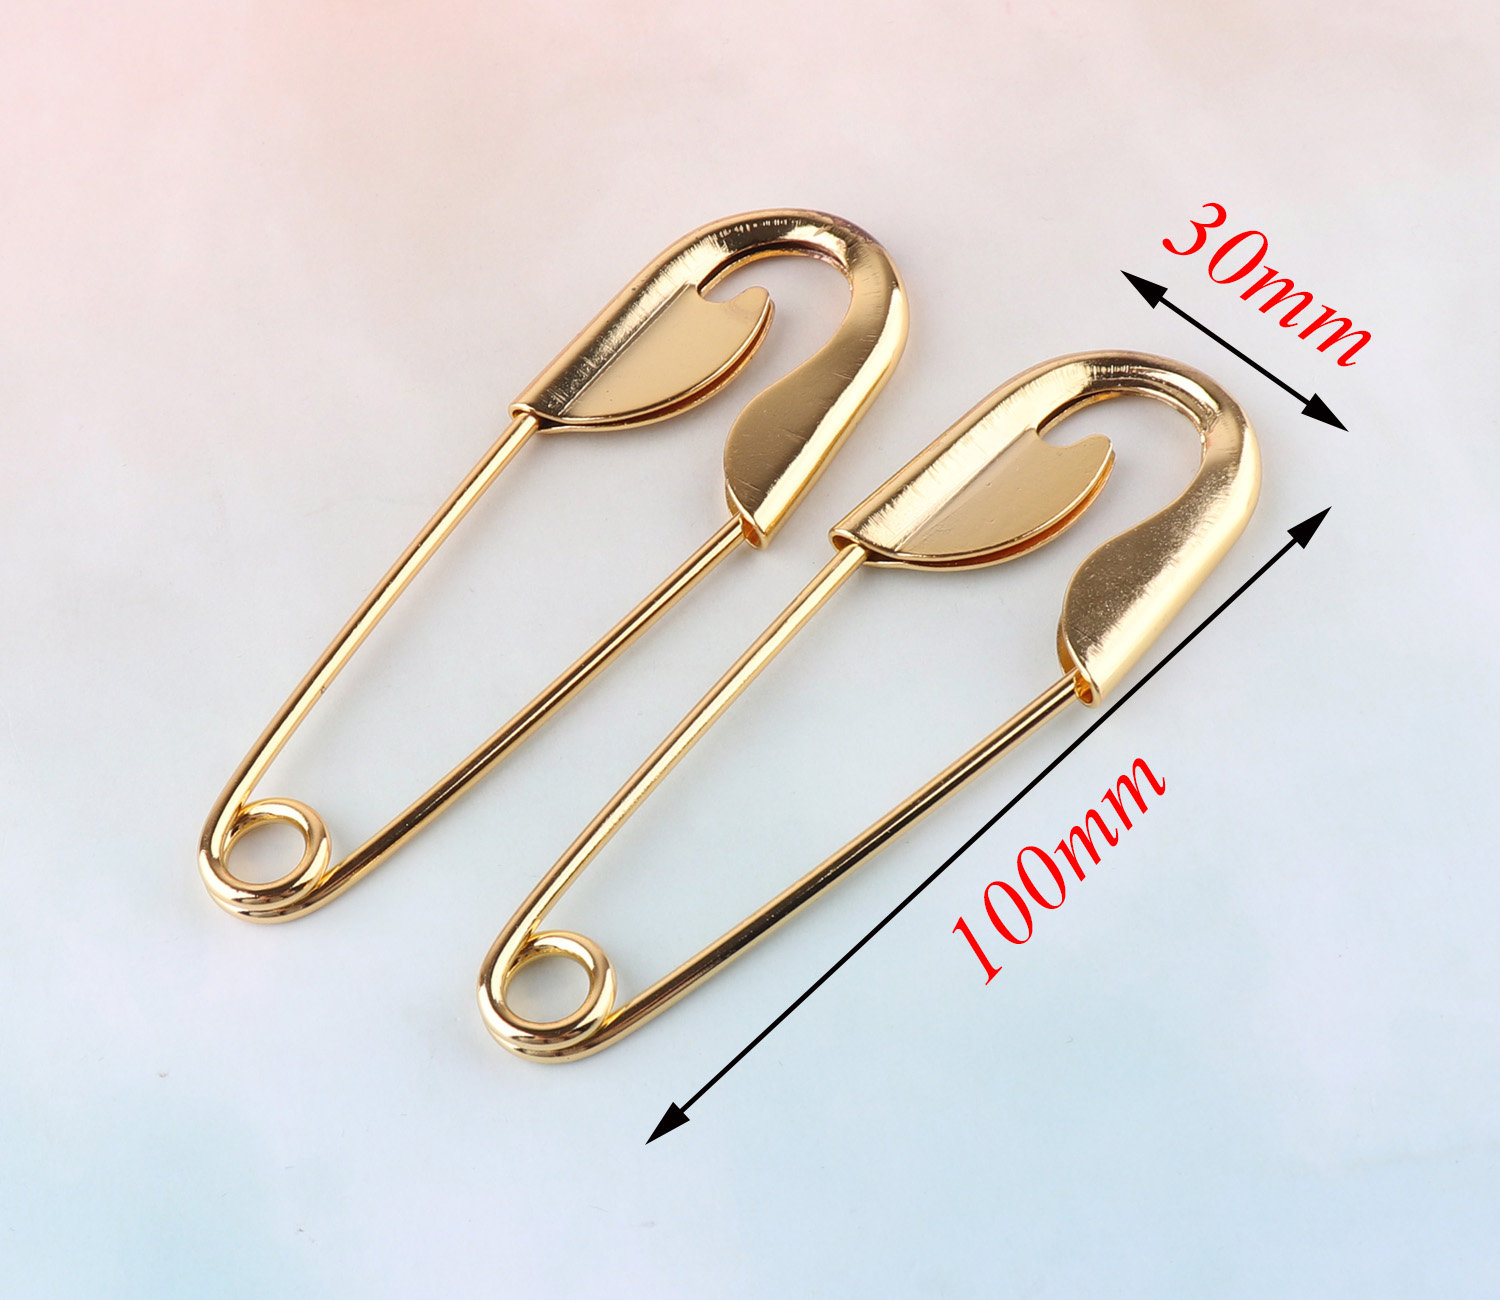 2 Inch 50mm Heavy Duty Steel Large Safety Pins Fastener, Gold Metal Safety  Pins for Blankets Crafts Skirts Kilts Knitted Fabric (40pcs )